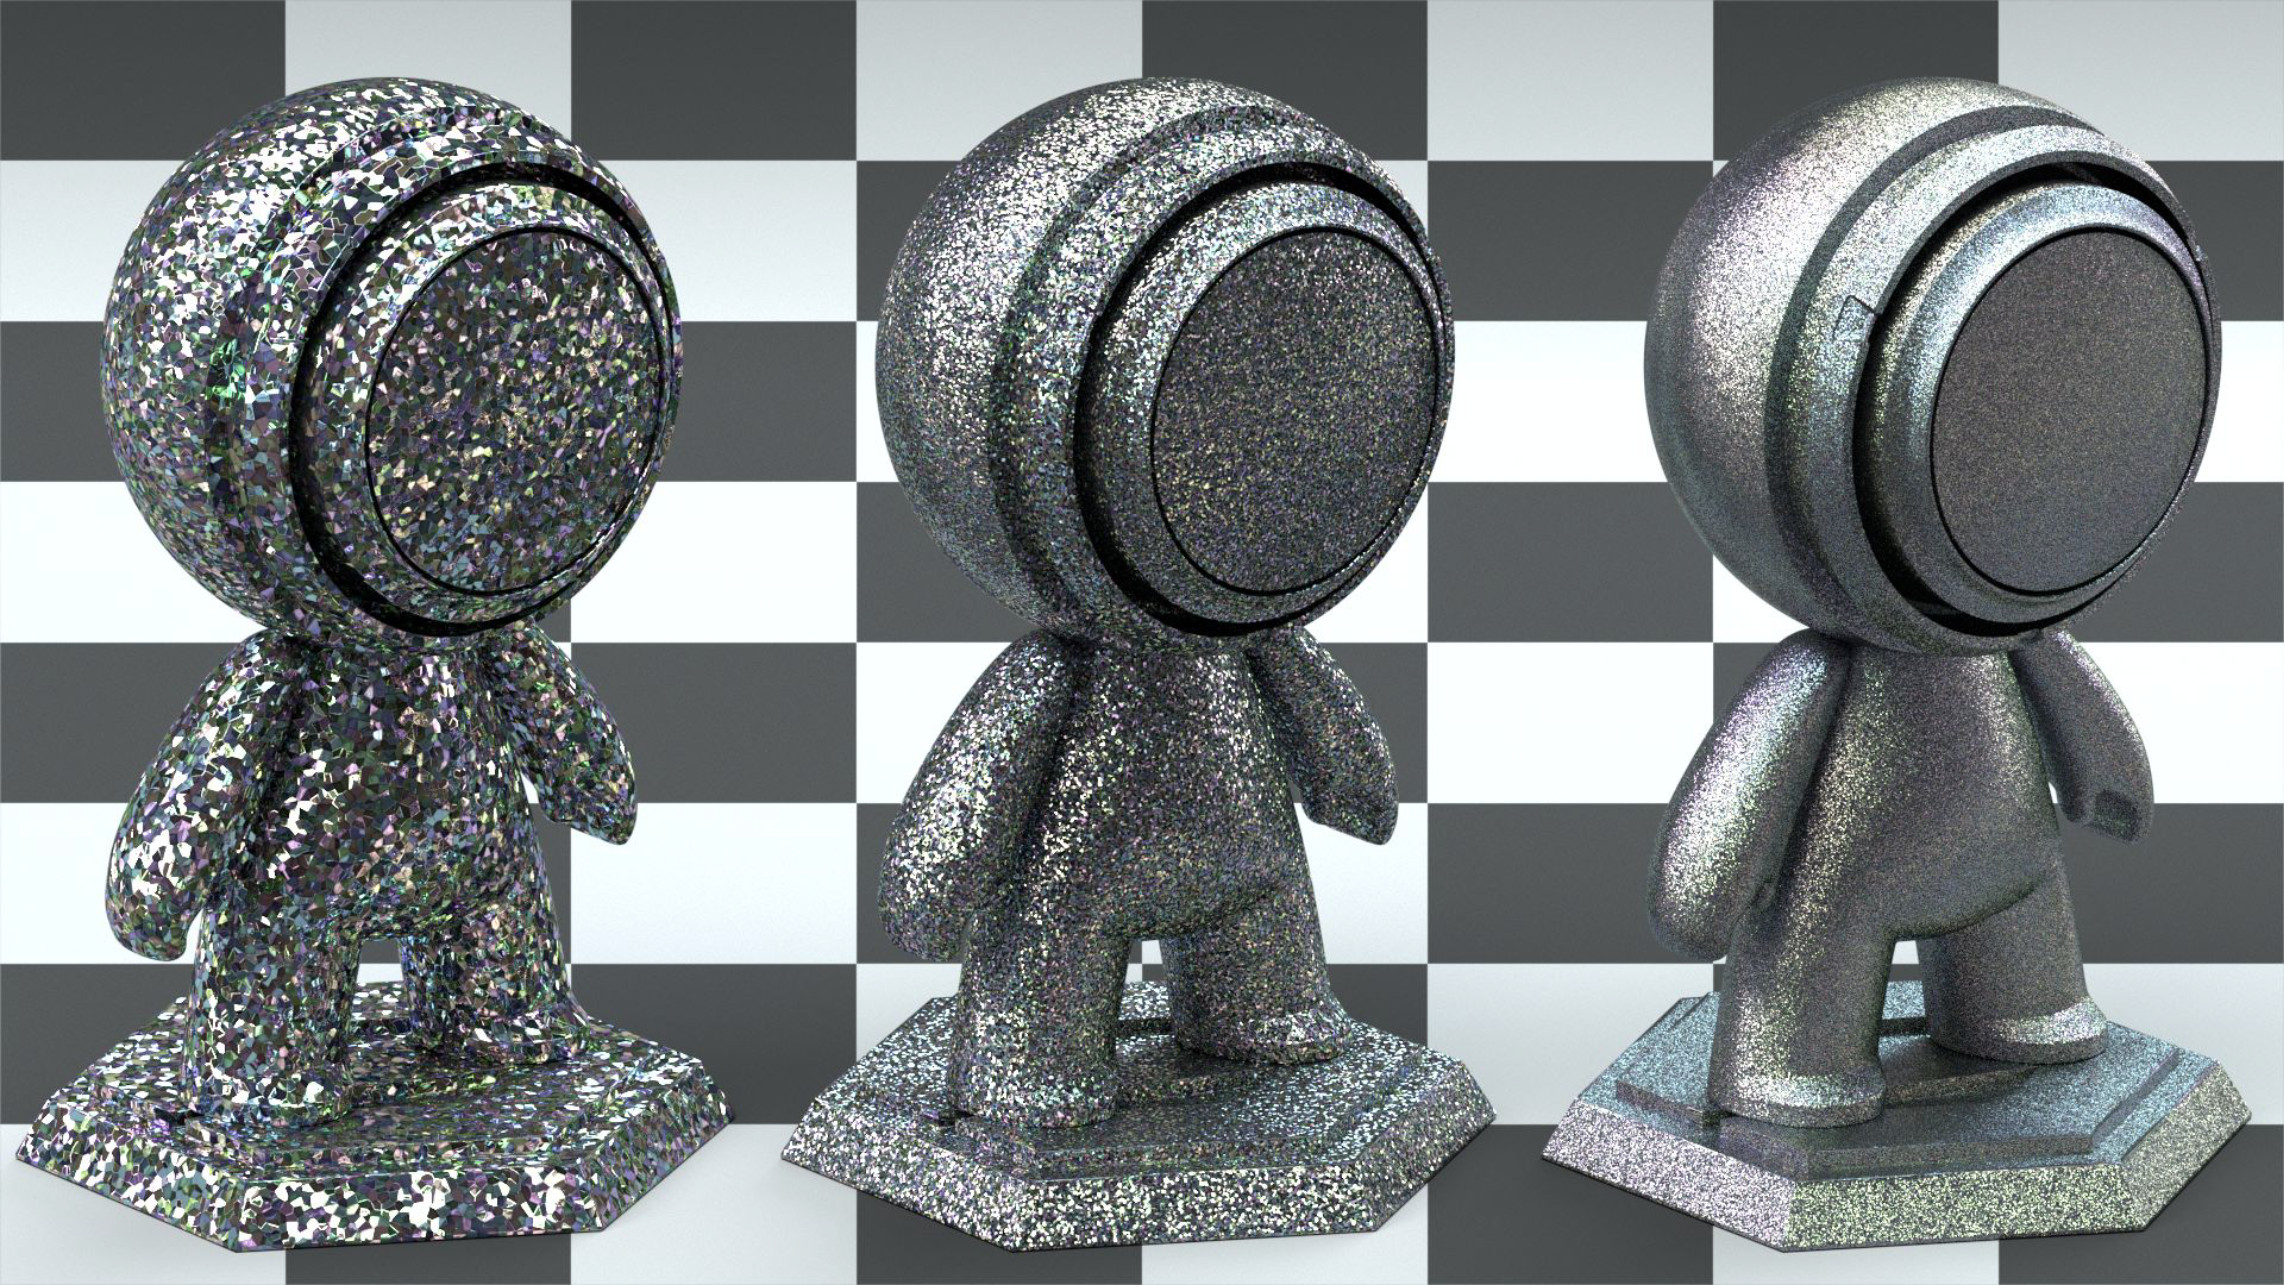 It started with a glitter material I made in Substance 3D Designer